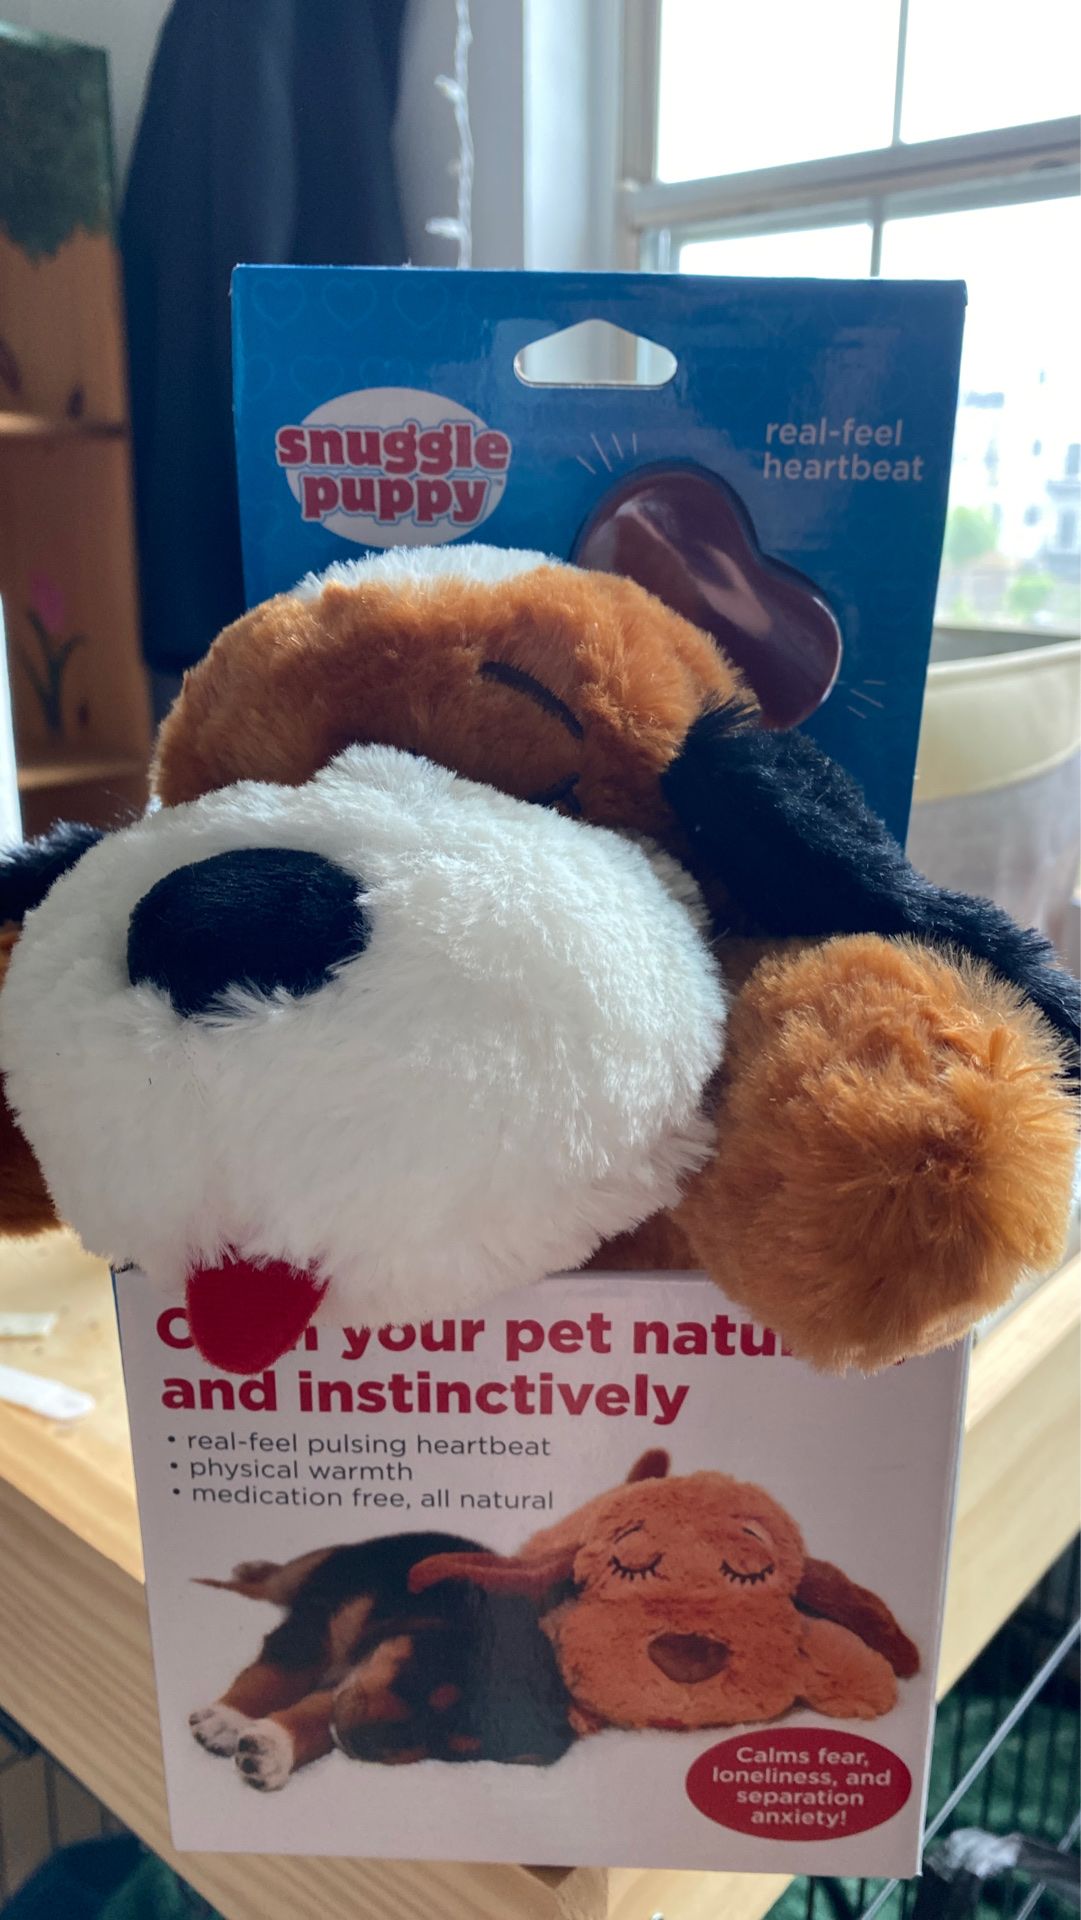 Snuggle puppy dog anxiety toy